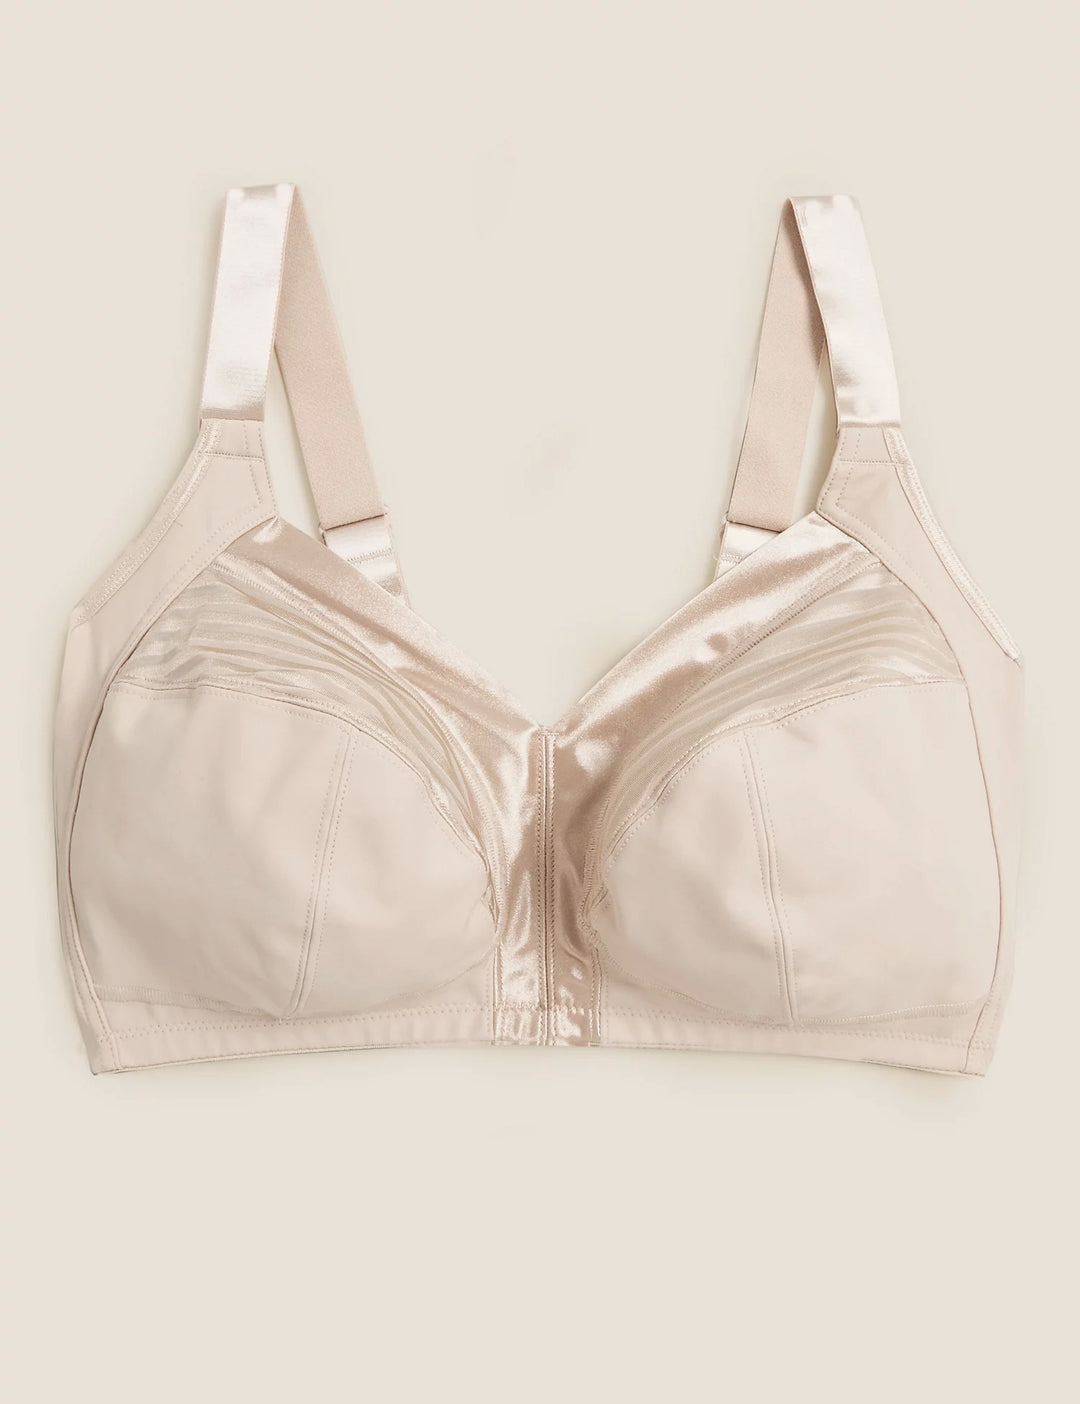 M&S Ladies Total Support Bra T33/8094A